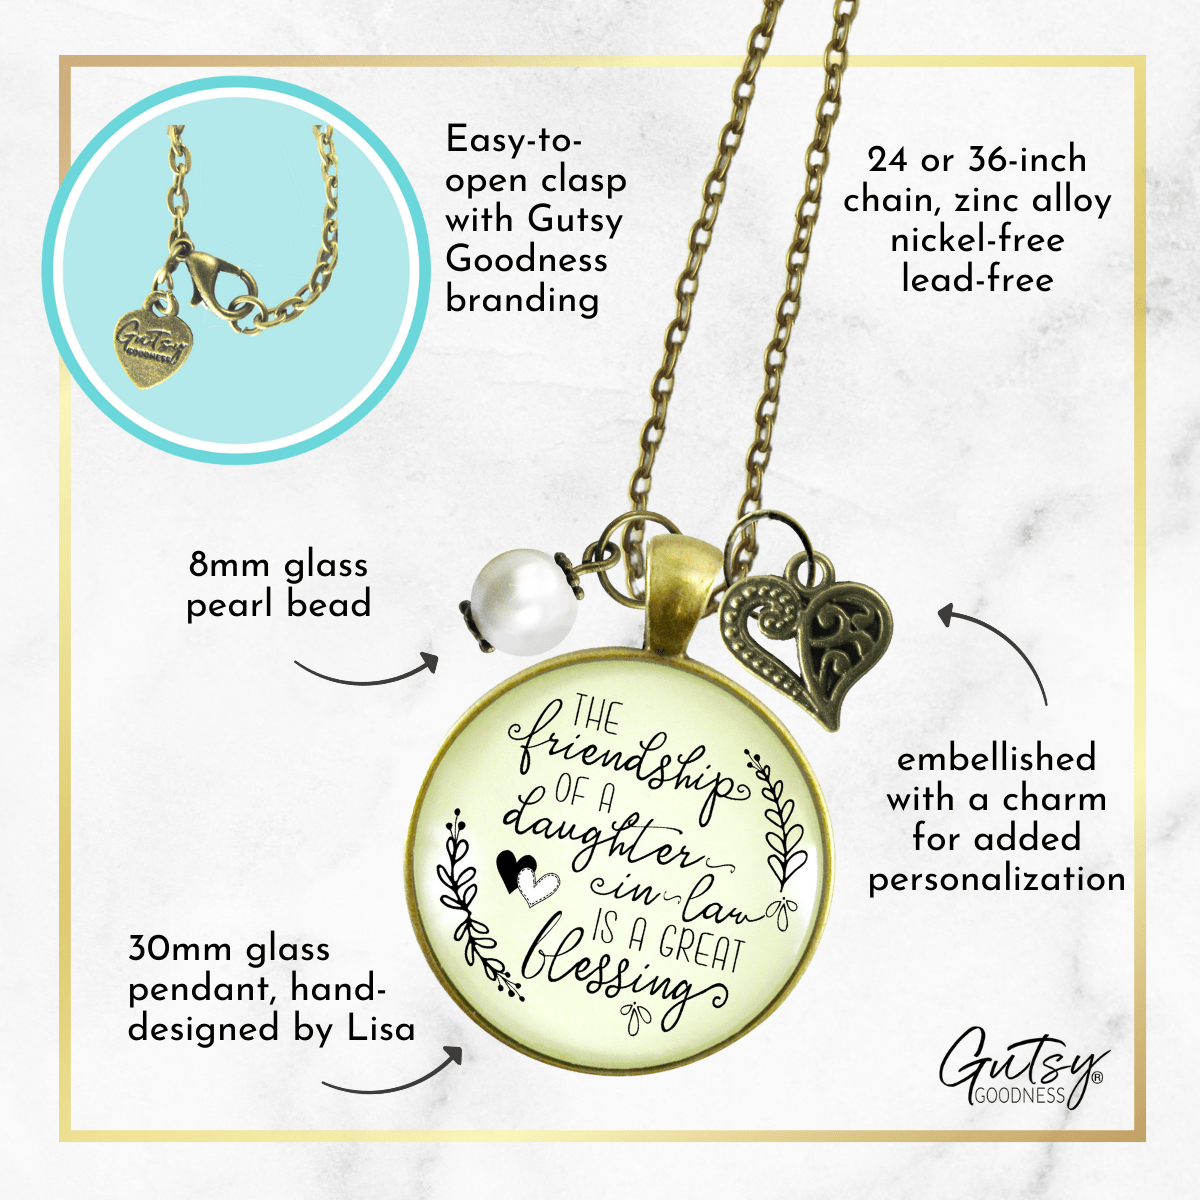 Gutsy Goodness Daughter in Law Necklace Friendship Blessing Gift from Mom Wedding Jewelry - Gutsy Goodness Handmade Jewelry;Daughter In Law Necklace Friendship Blessing Gift From Mom Wedding Jewelry - Gutsy Goodness Handmade Jewelry Gifts